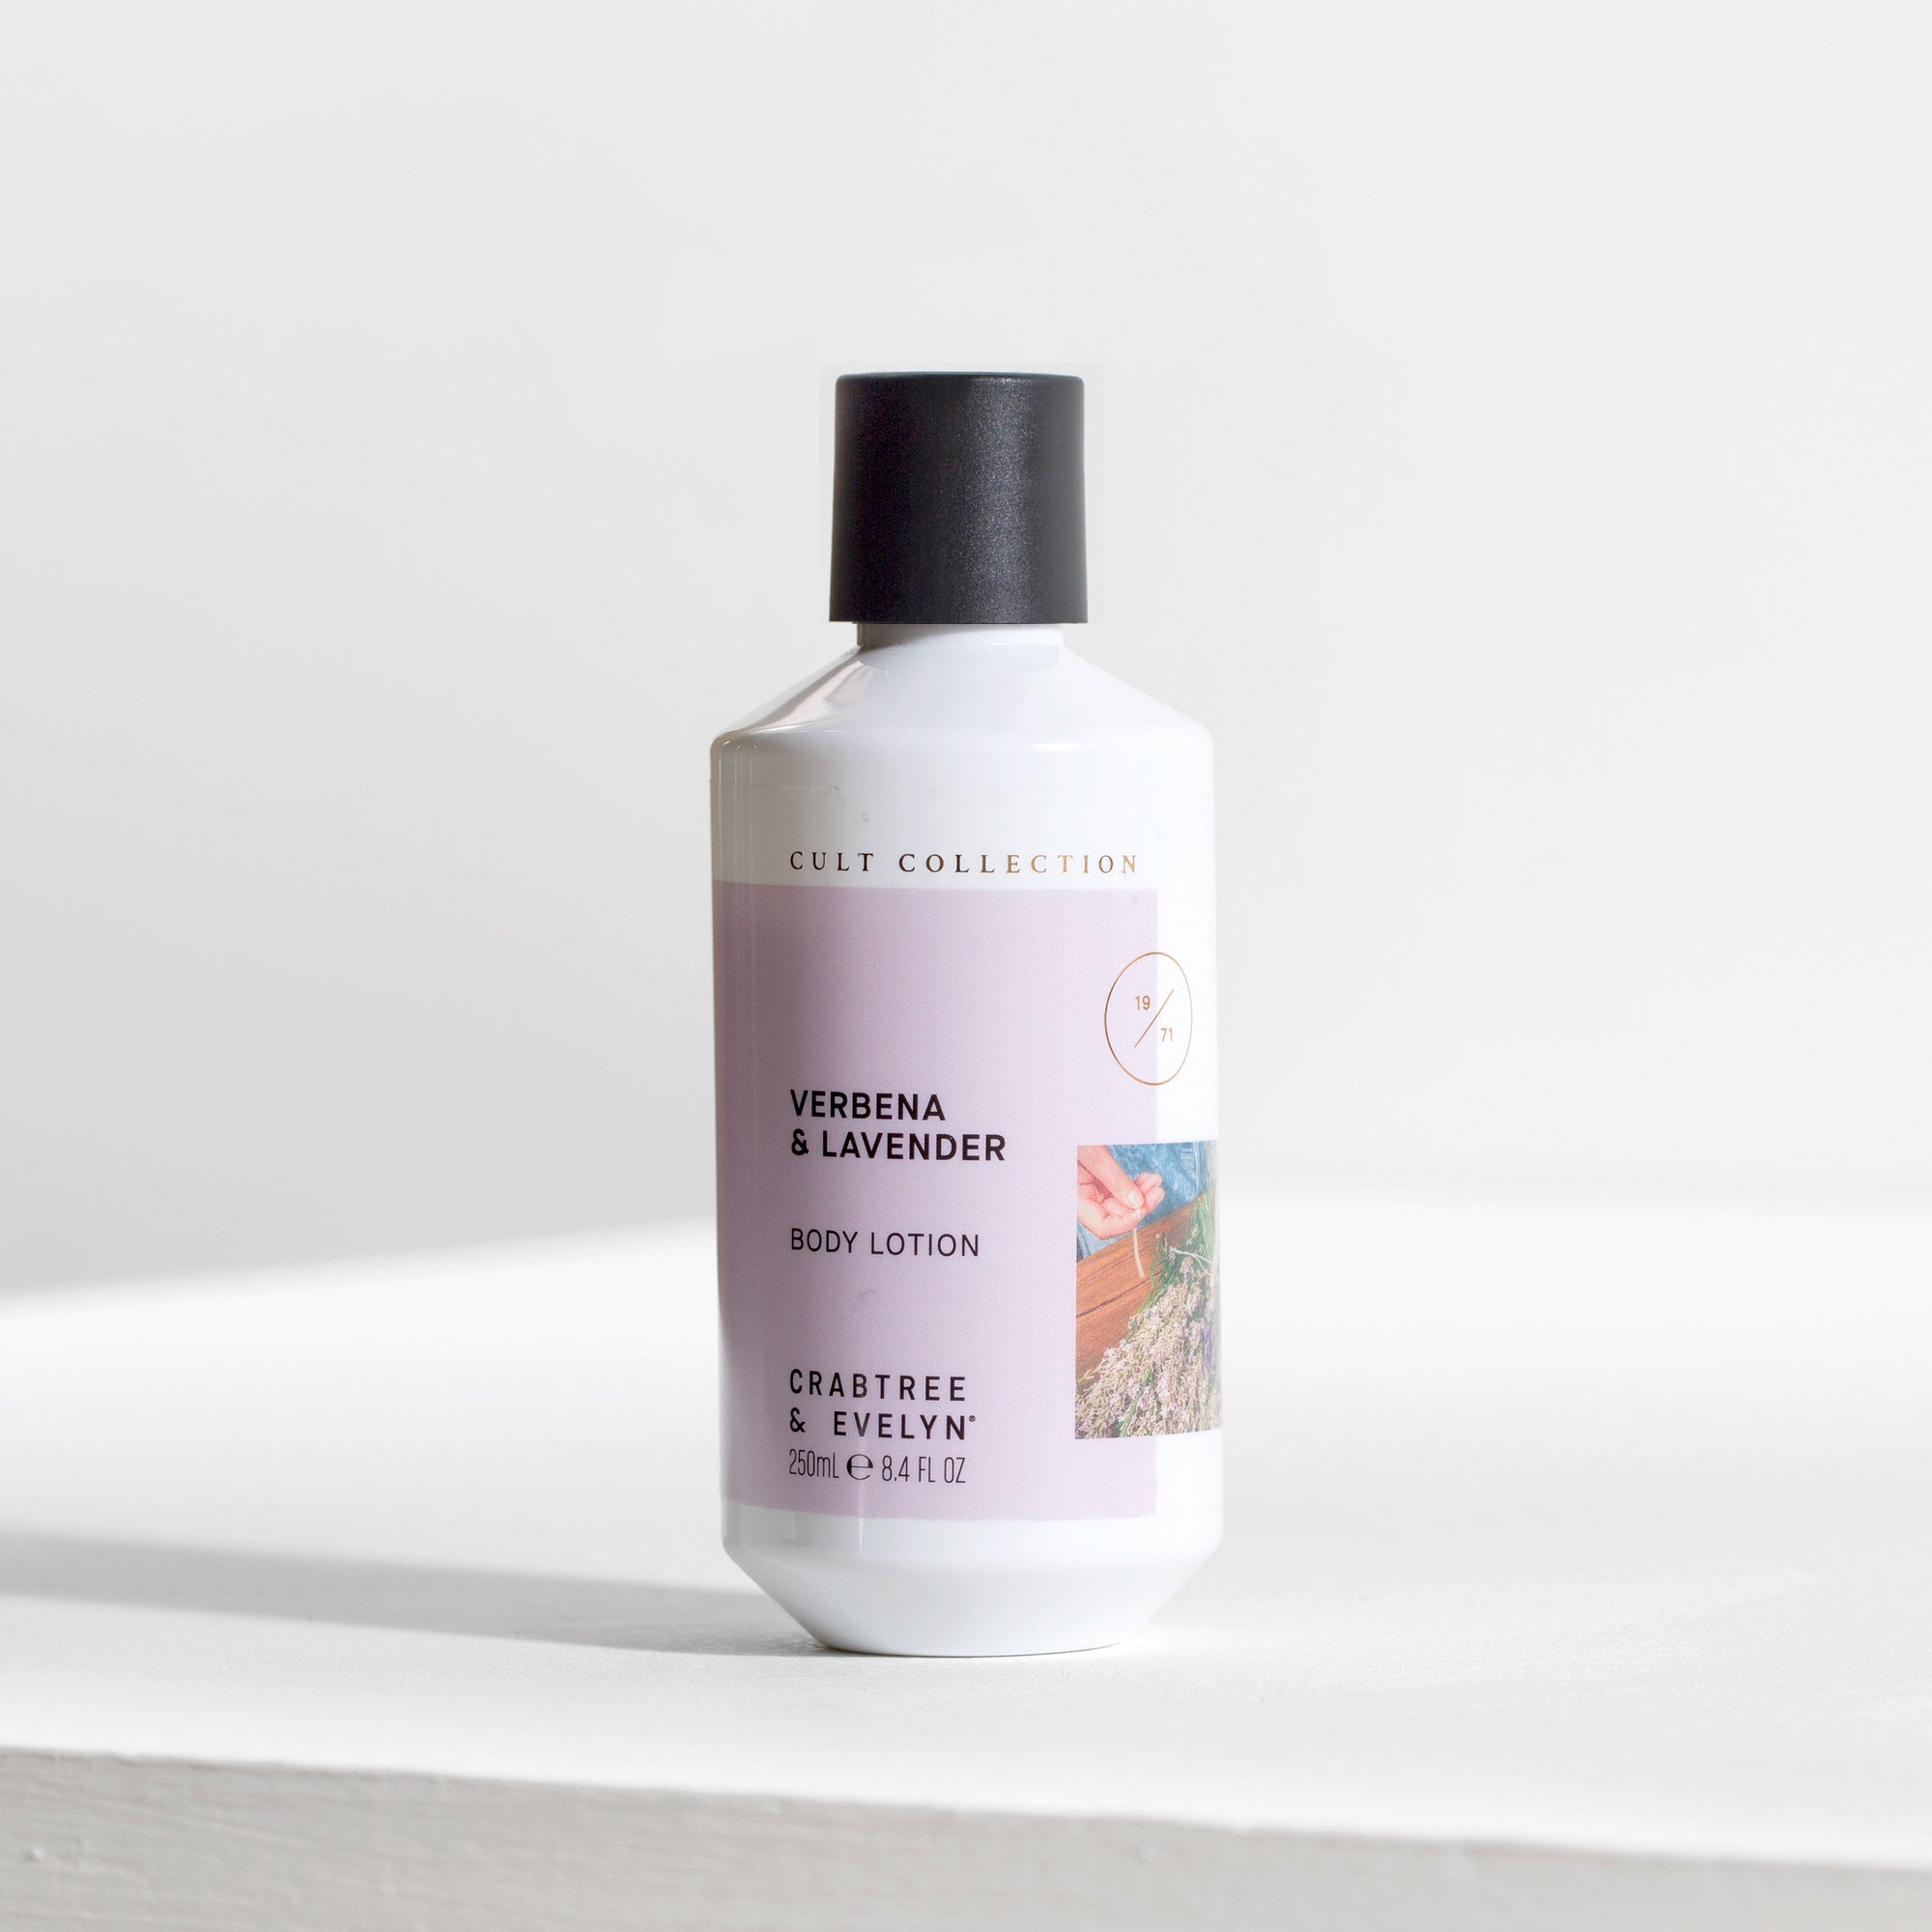 Cult Collection-Verbena & Lavender Body Lotion - 250ml